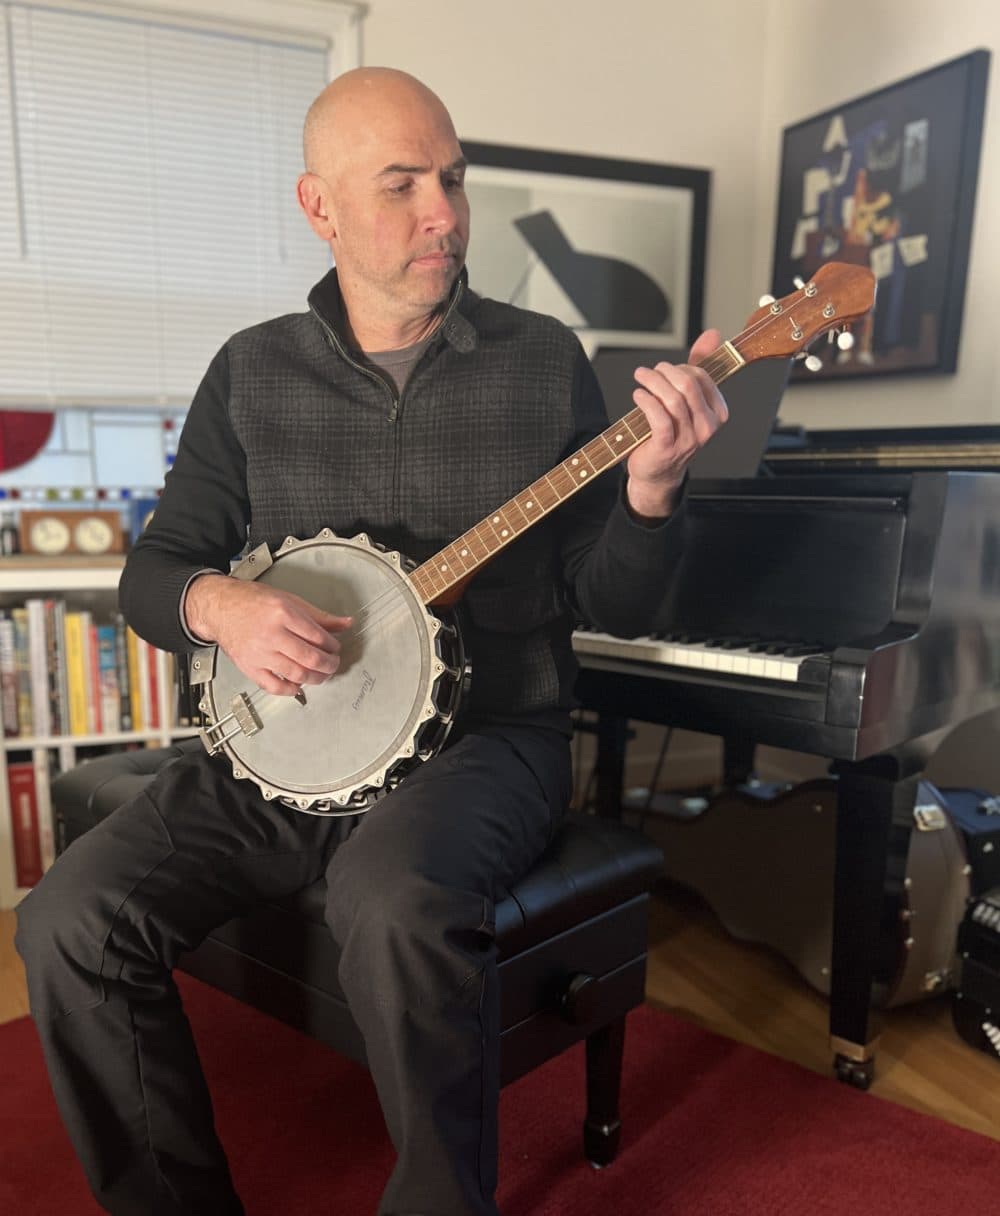 Eric Shimelonis plays the tenor banjo: a four-stringed instrument with a thin membrane stretched over a frame. The circular membrane is typically made of plastic or animal skin. (Courtesy of Rebecca Sheir)